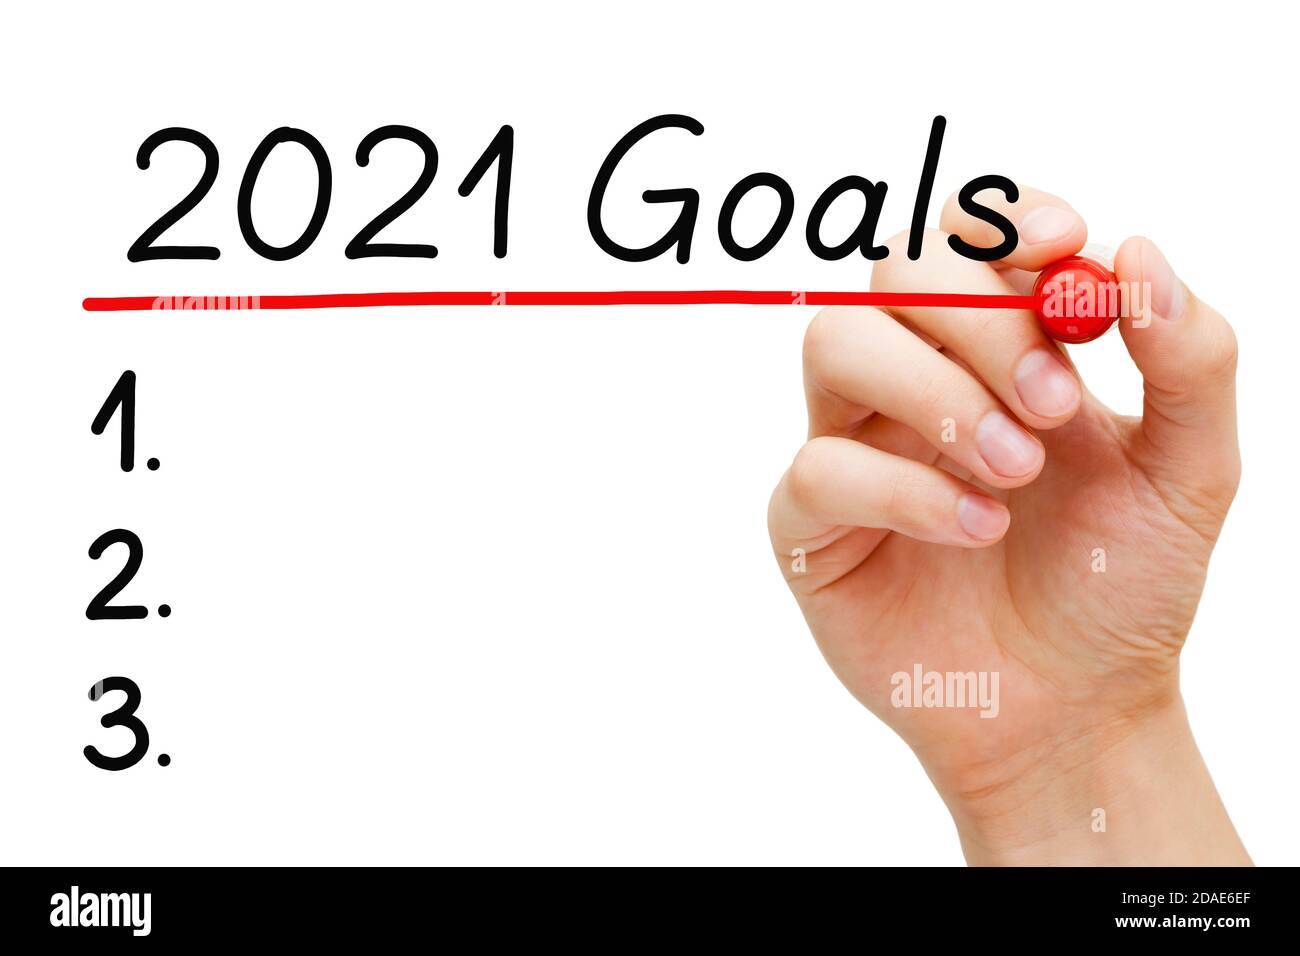 Blank goals list concept for year 2021 isolated on white background. Hand underlining 2021 Goals with red marker on transparent wipe board. Stock Photo